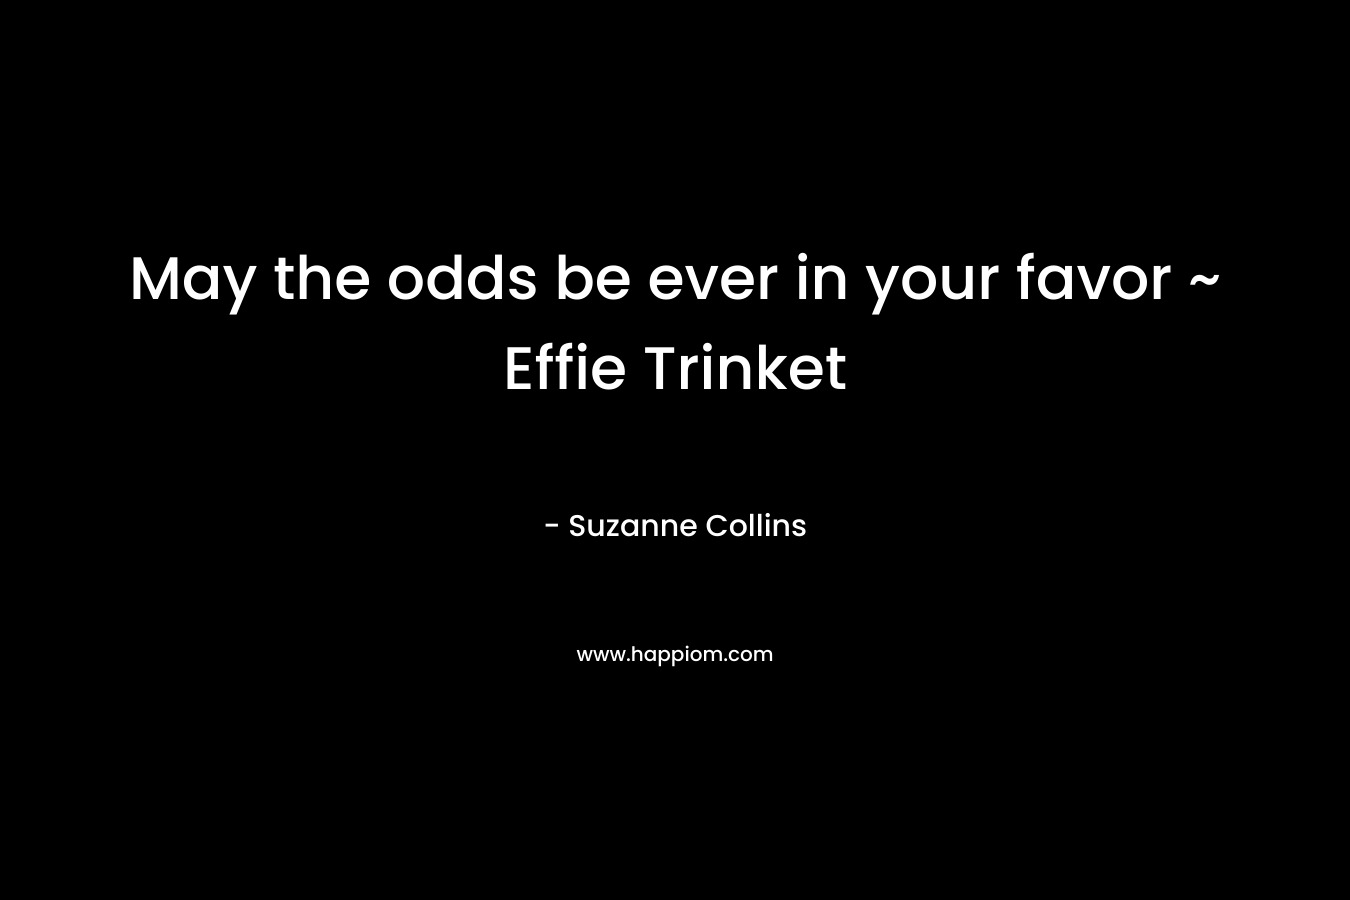 May the odds be ever in your favor ~ Effie Trinket